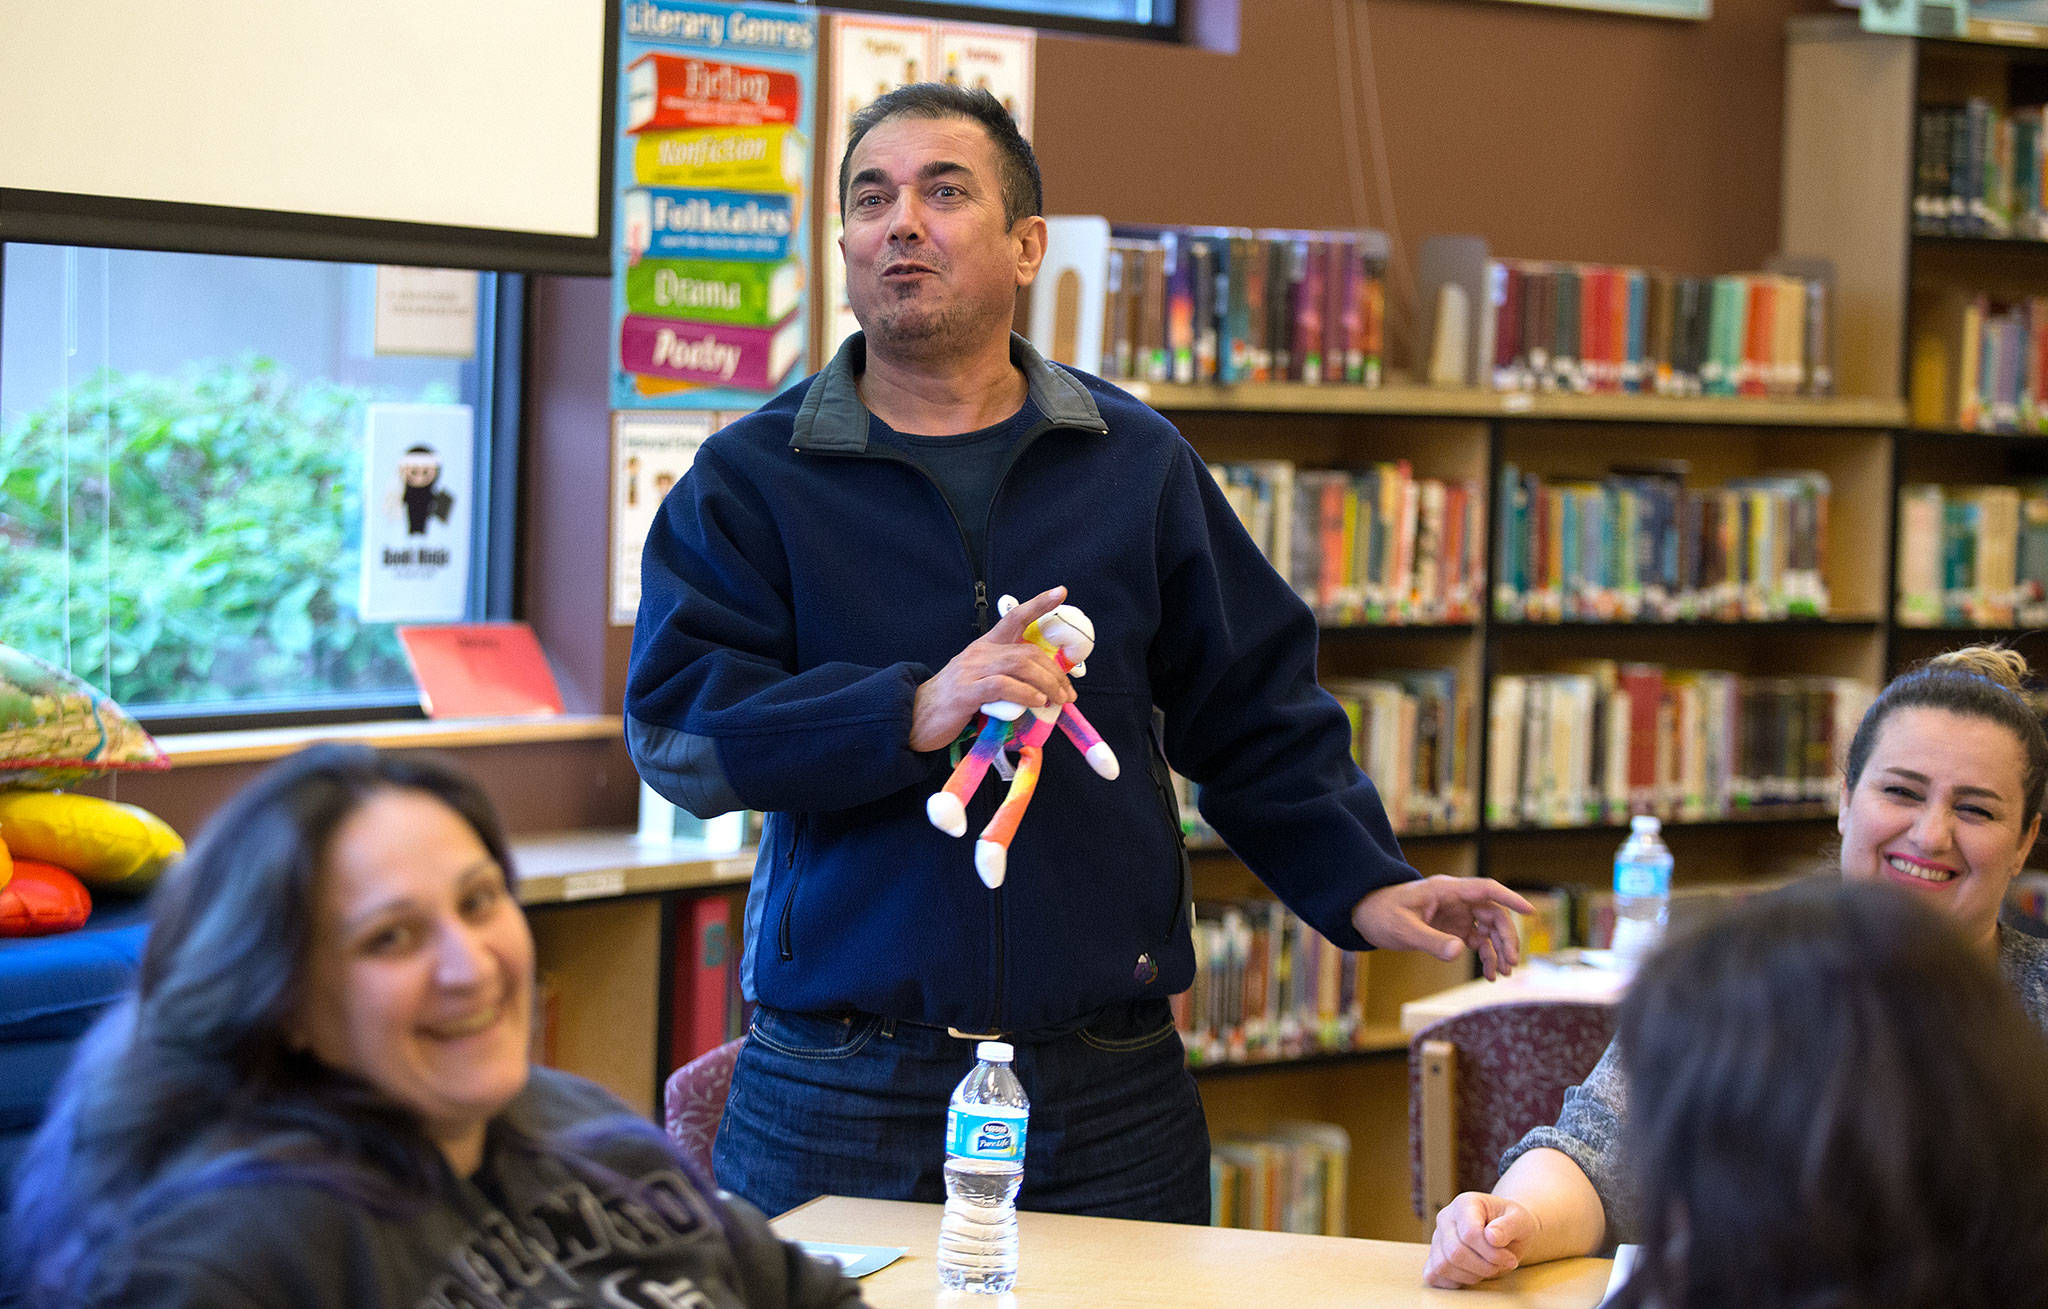 Adnan Kez has the class in stitches as he accidentally says he has three wives when he meant to say three children. He and his wife, Jaymin Shaekhah (right), are learning English at Emerson Elementary School. (Andy Bronson / The Herald)